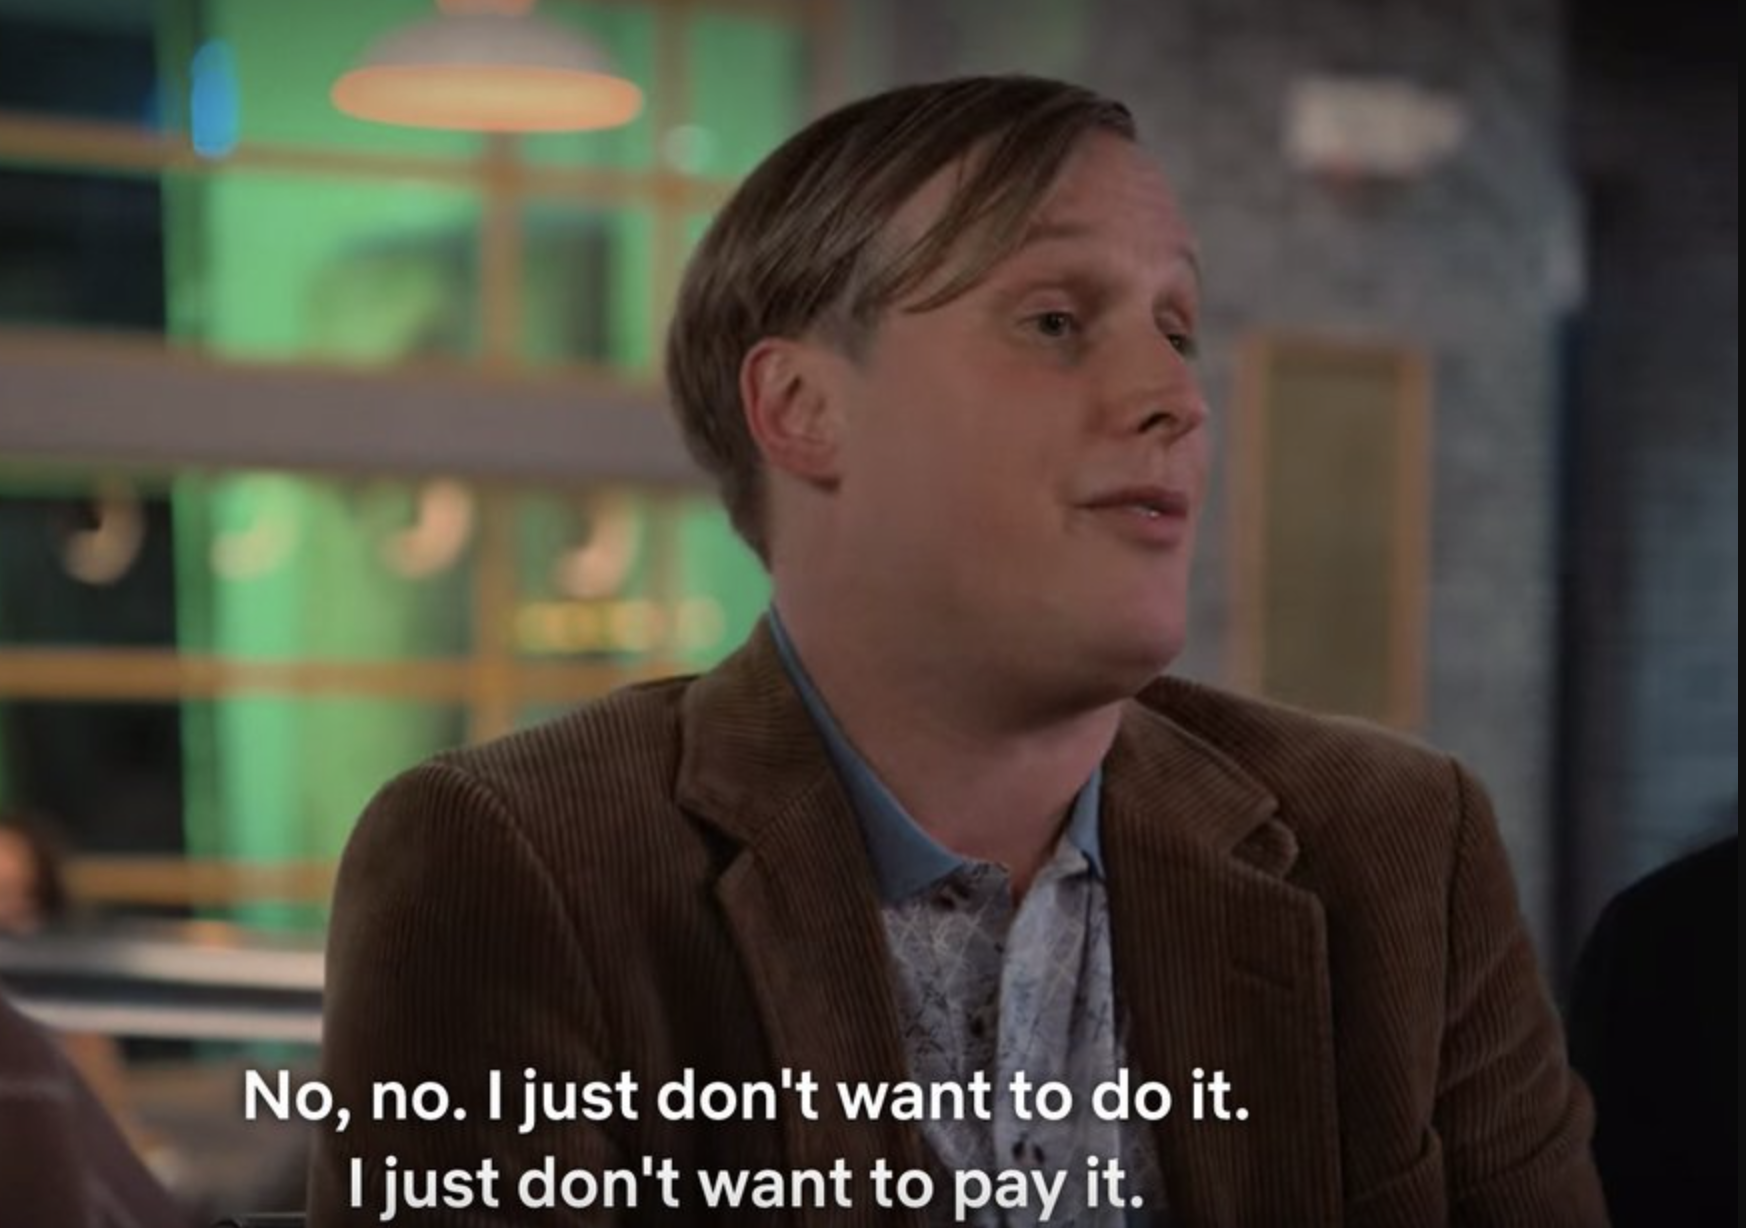 john early wears a suit and looks to the side saying &quot;no, no, i just don&#x27;t want to do it. i just don&#x27;t want to pay it.&quot;